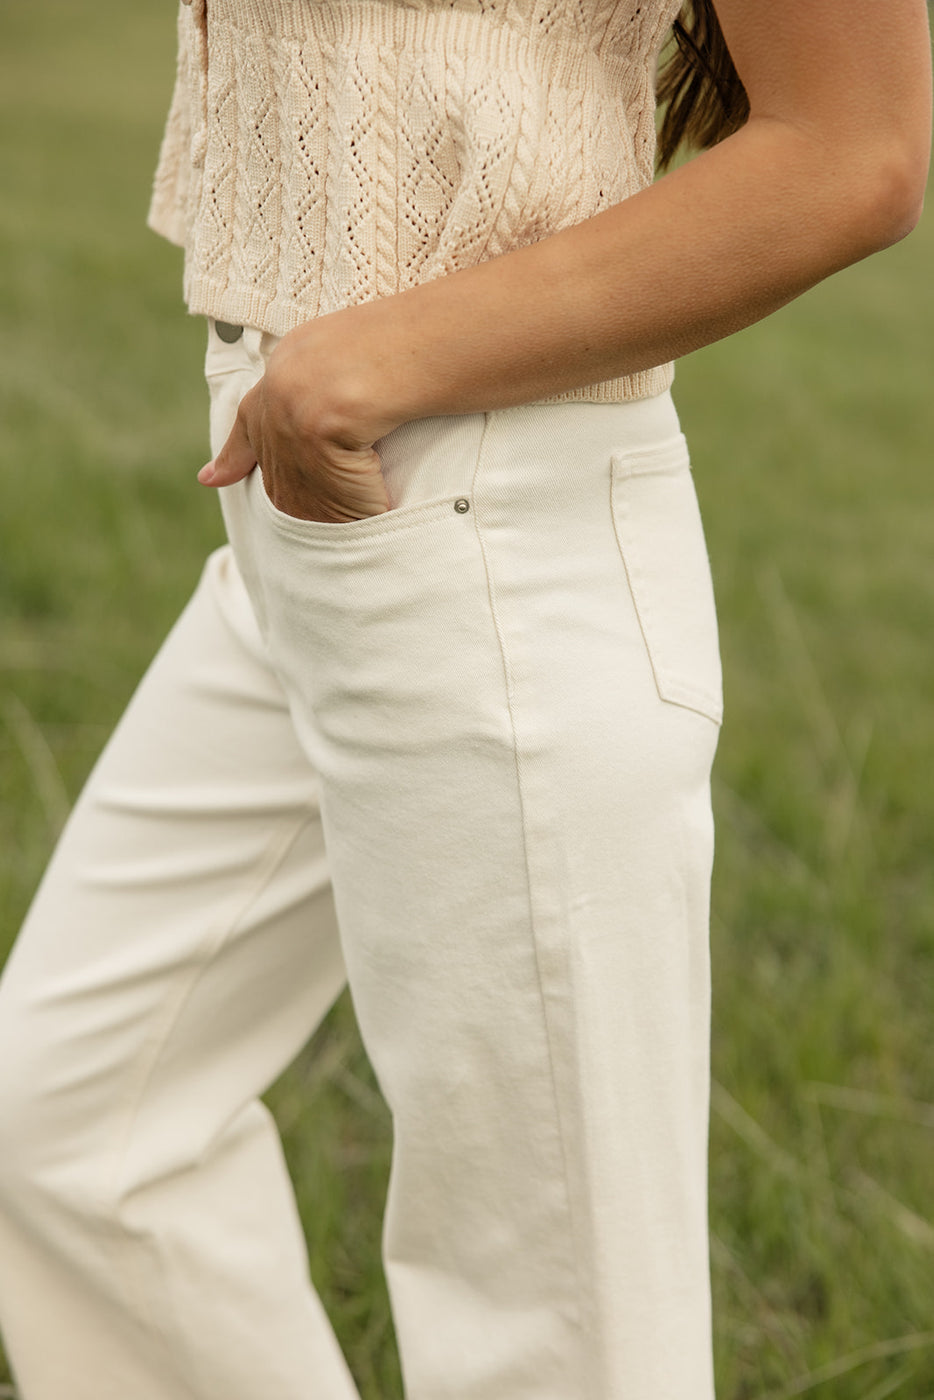 a person in white pants with their hands in their pockets